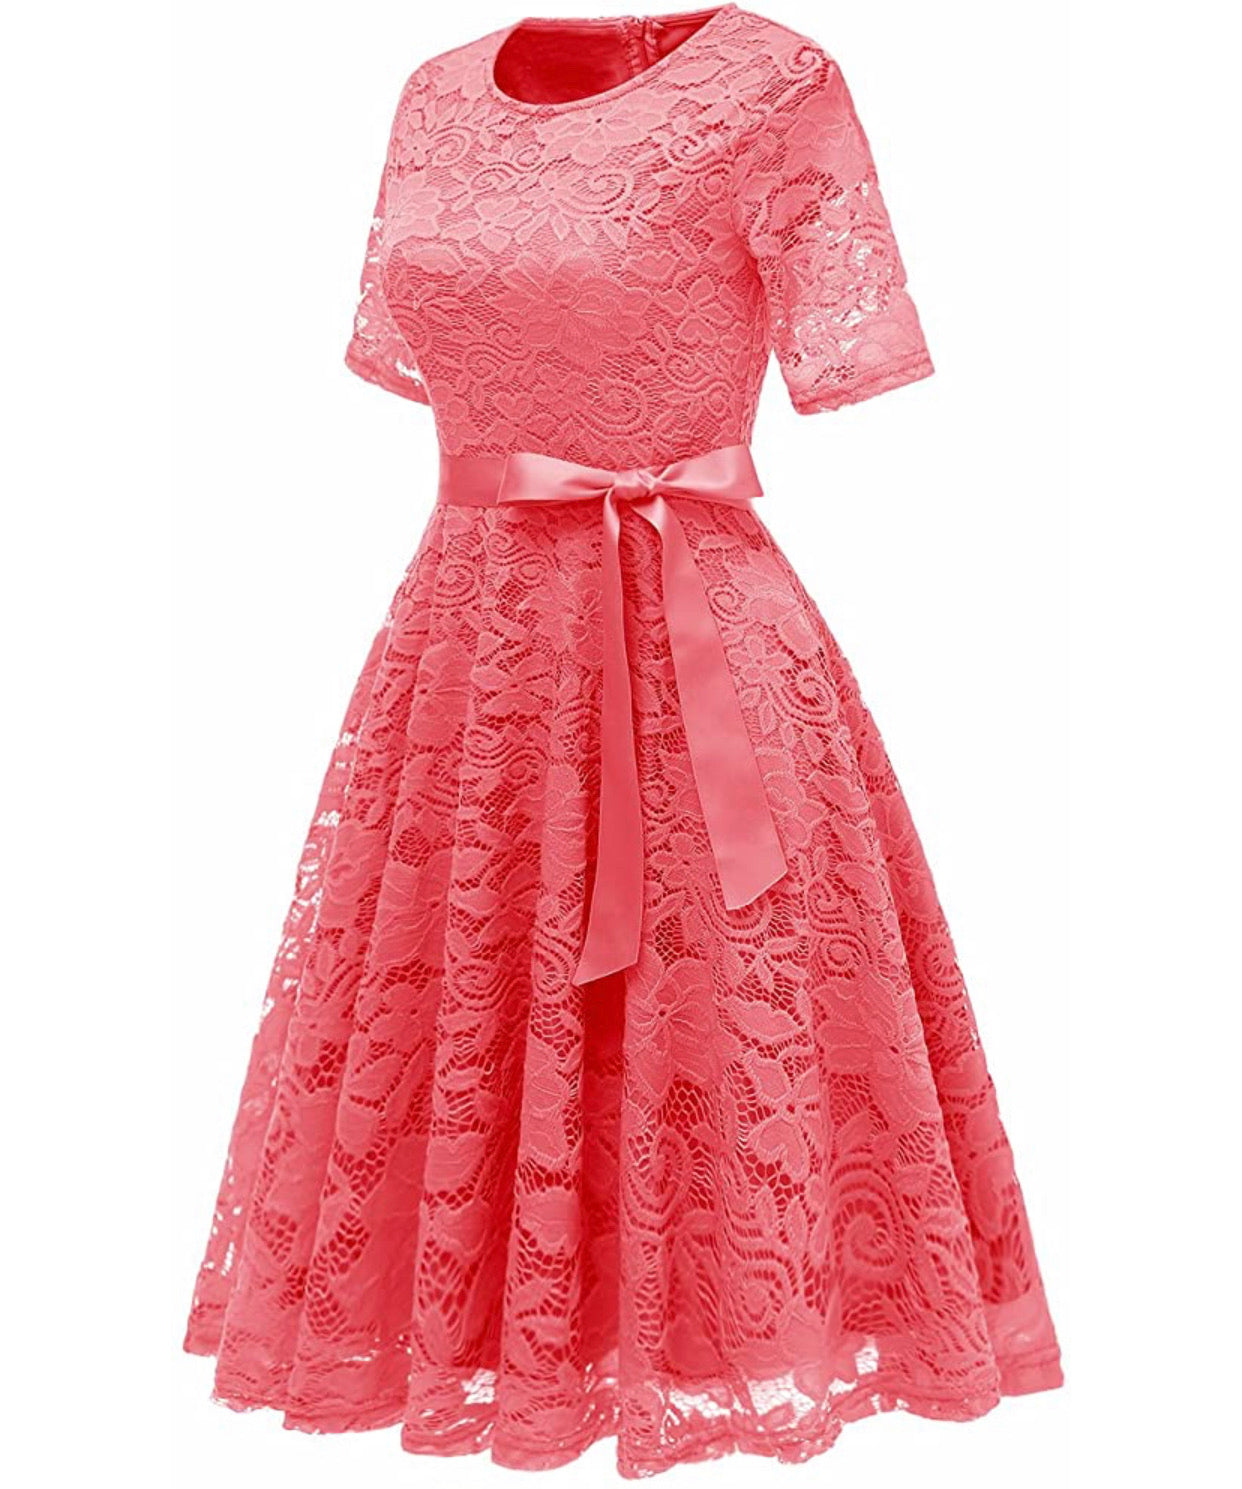 Vintage Inspired Full Lace Cocktail Dress, Sizes Small - 3XLarge (Cora ...